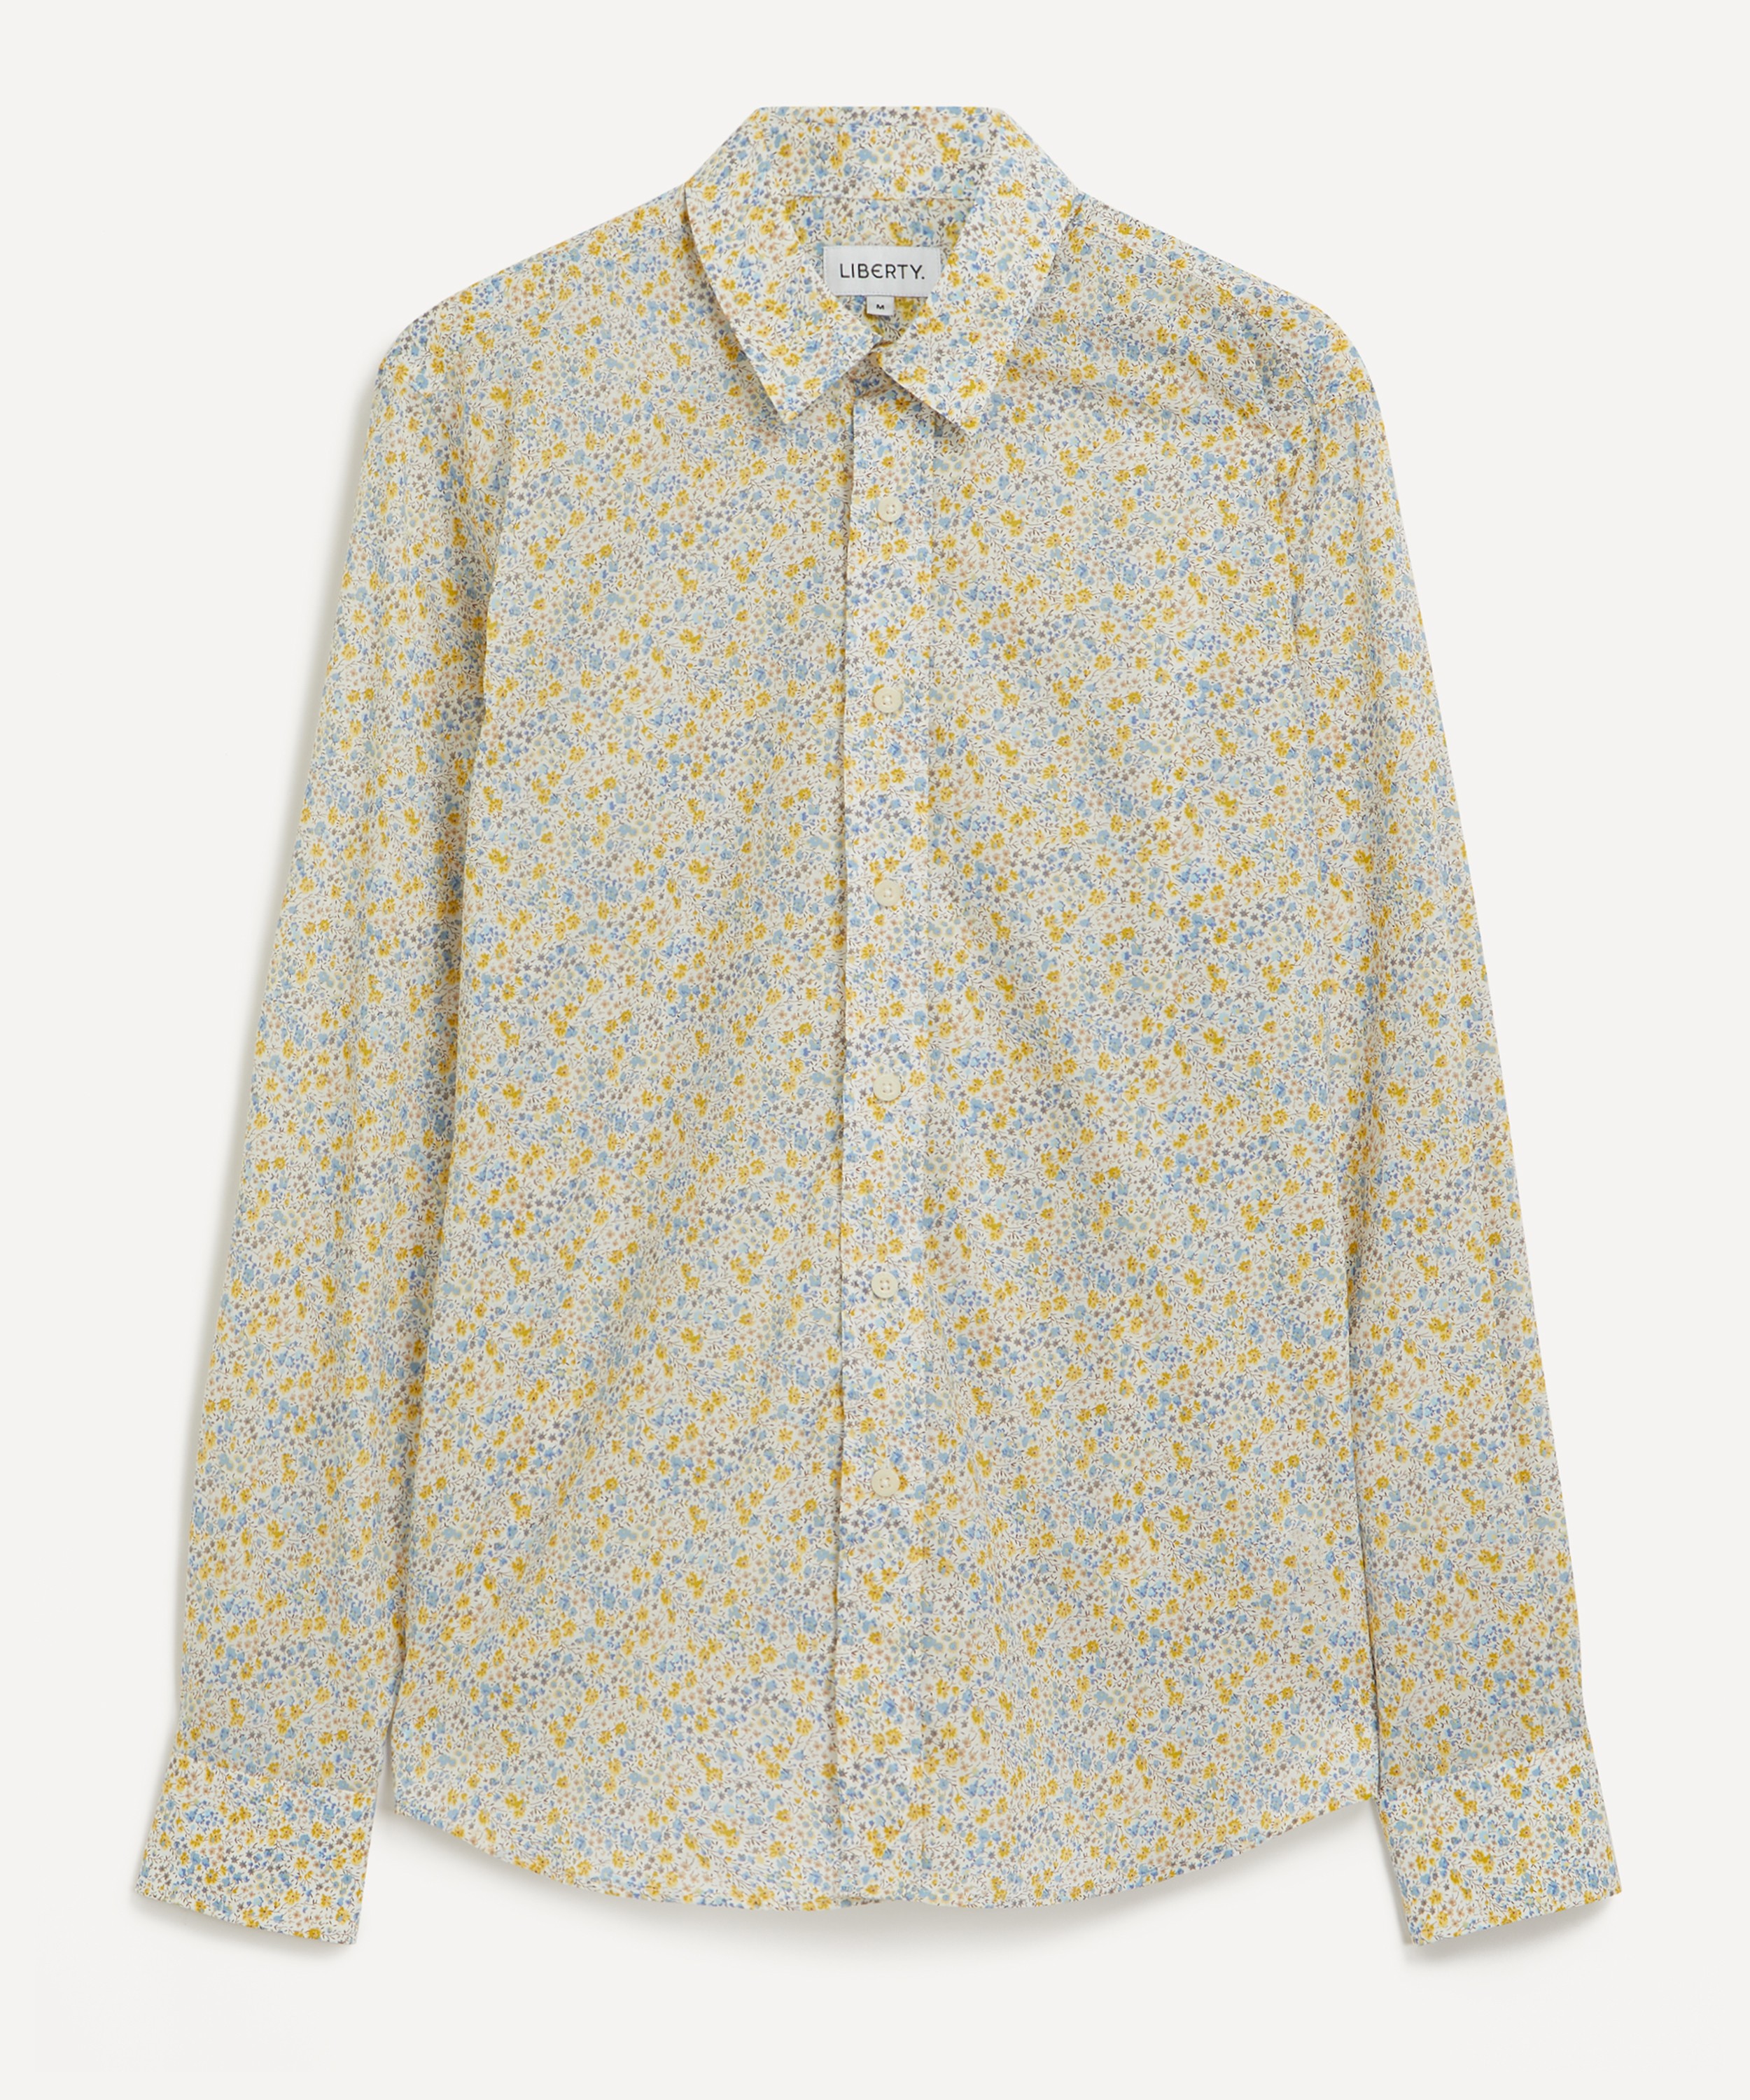 Liberty - Phoebe Lasenby Tana Lawn™ Cotton Casual Classic Shirt image number 0